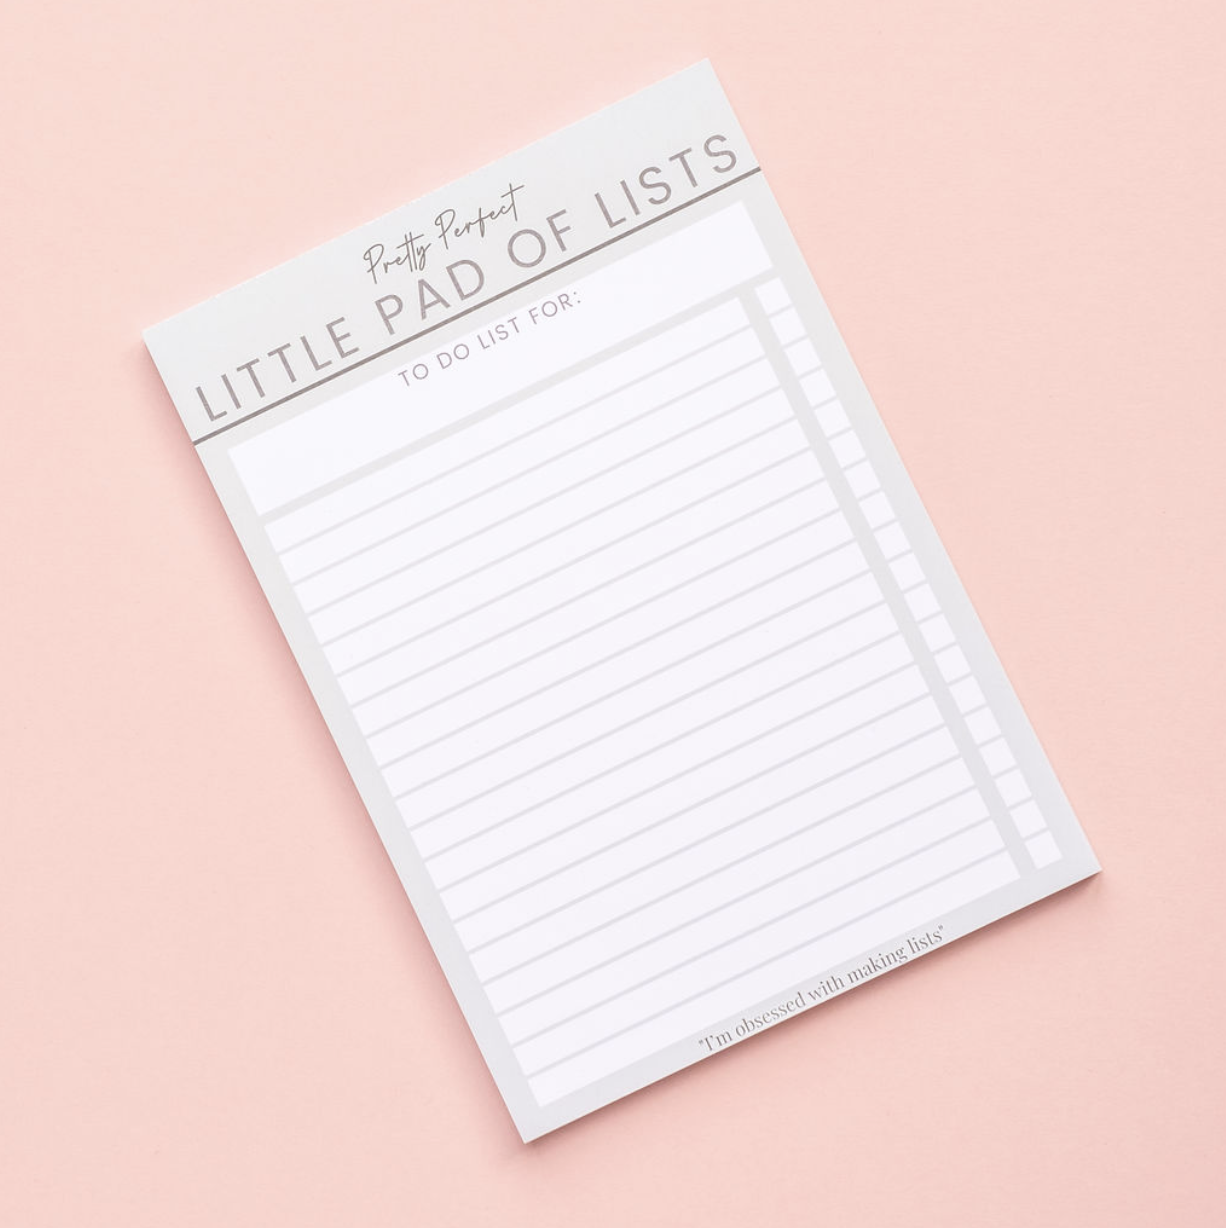 LITTLE PAD OF LISTS (2 COLOURS)